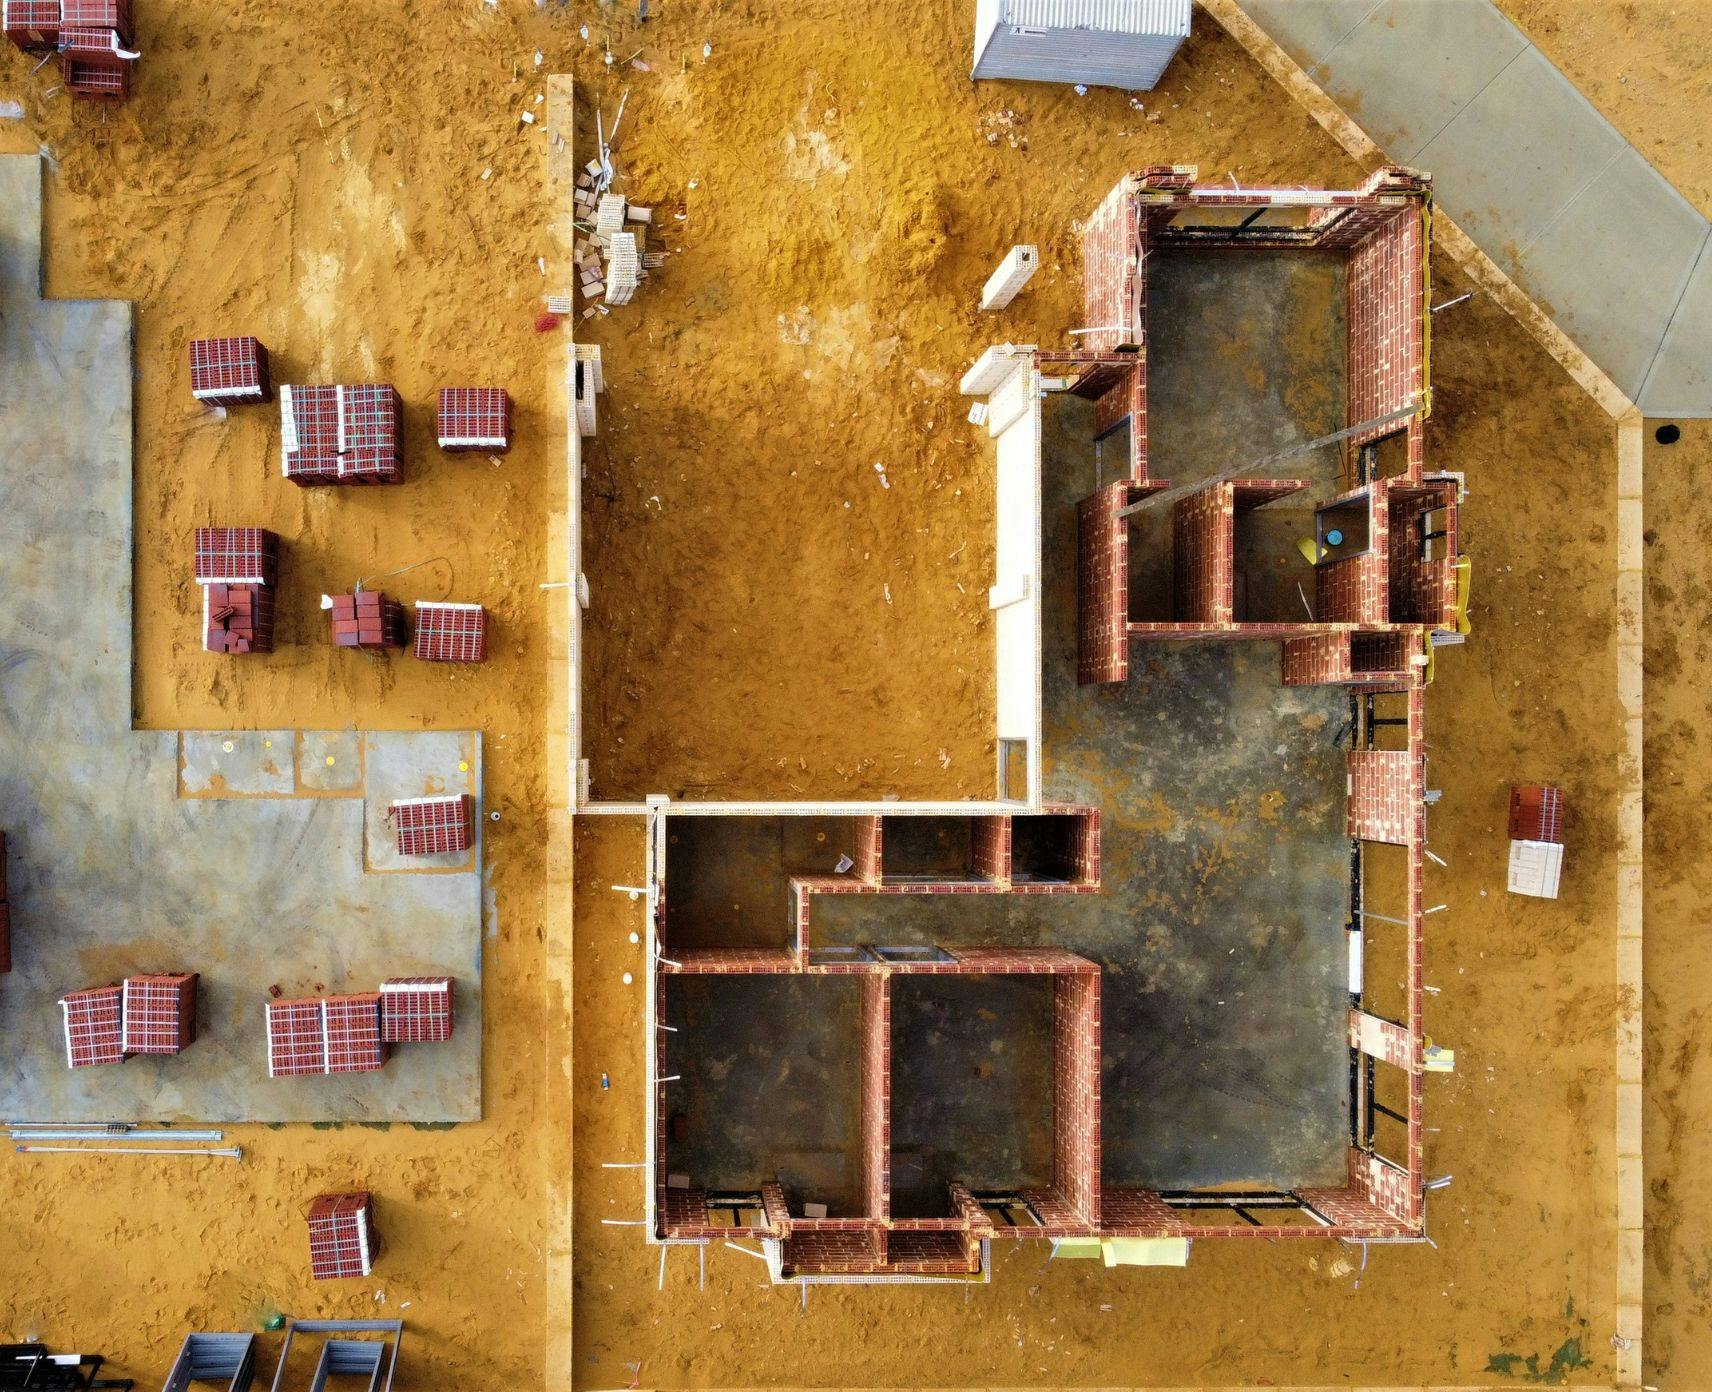 Aerial view of an empty housing construction site